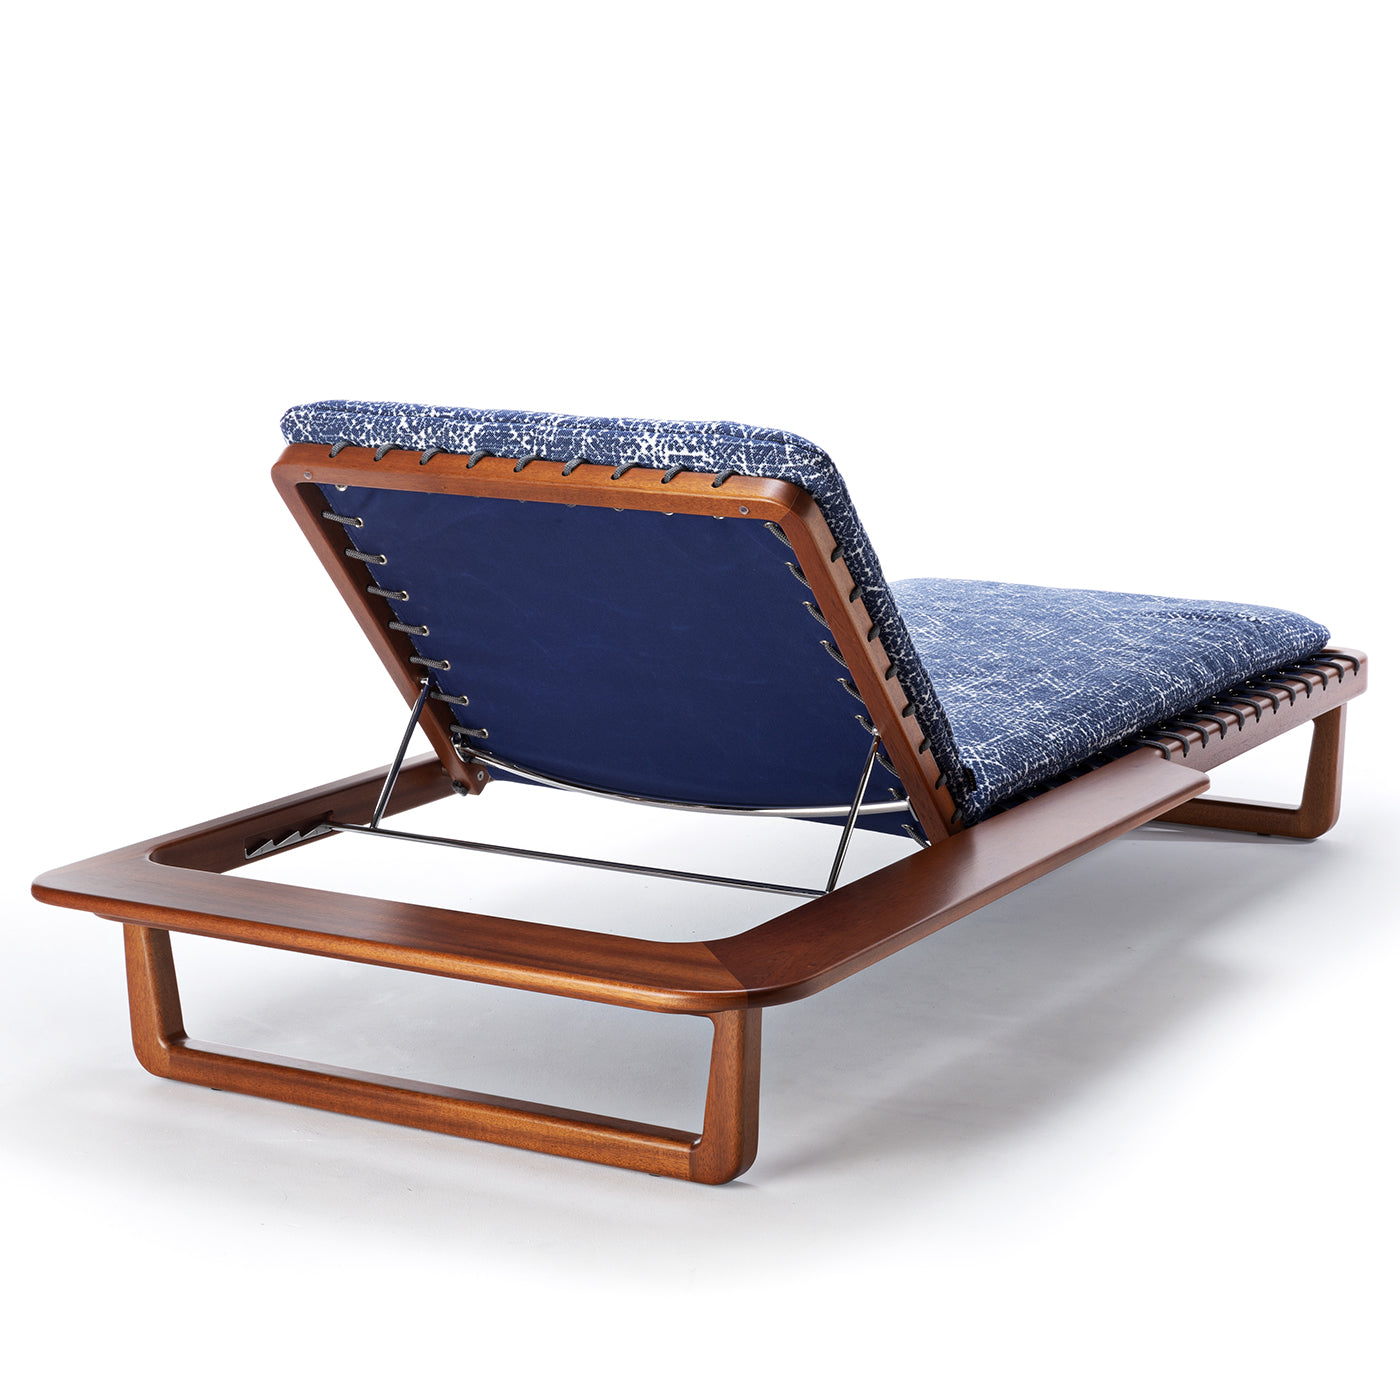 Sunset Sun Lounger by Paola Navone - Alternative view 2